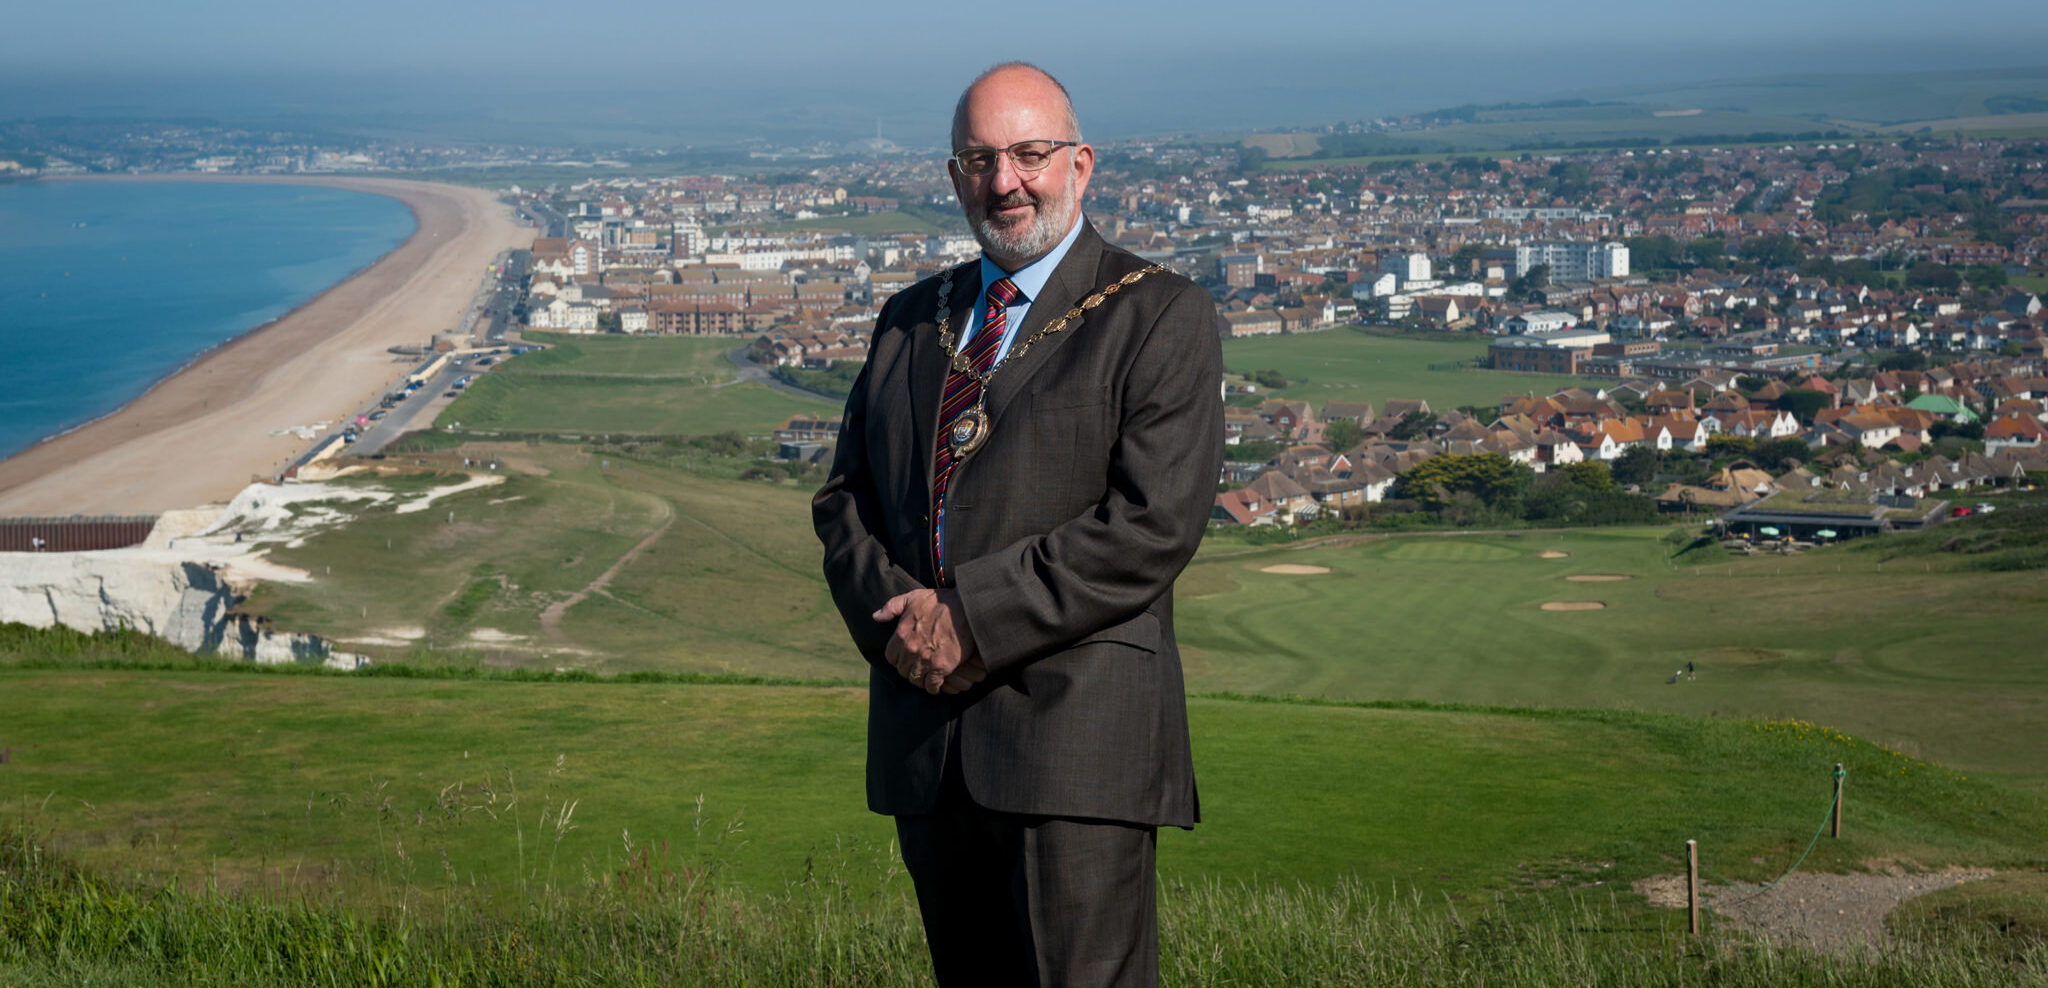 The Mayor of Seaford stands on a hill overlooking the town and beach of Seaford